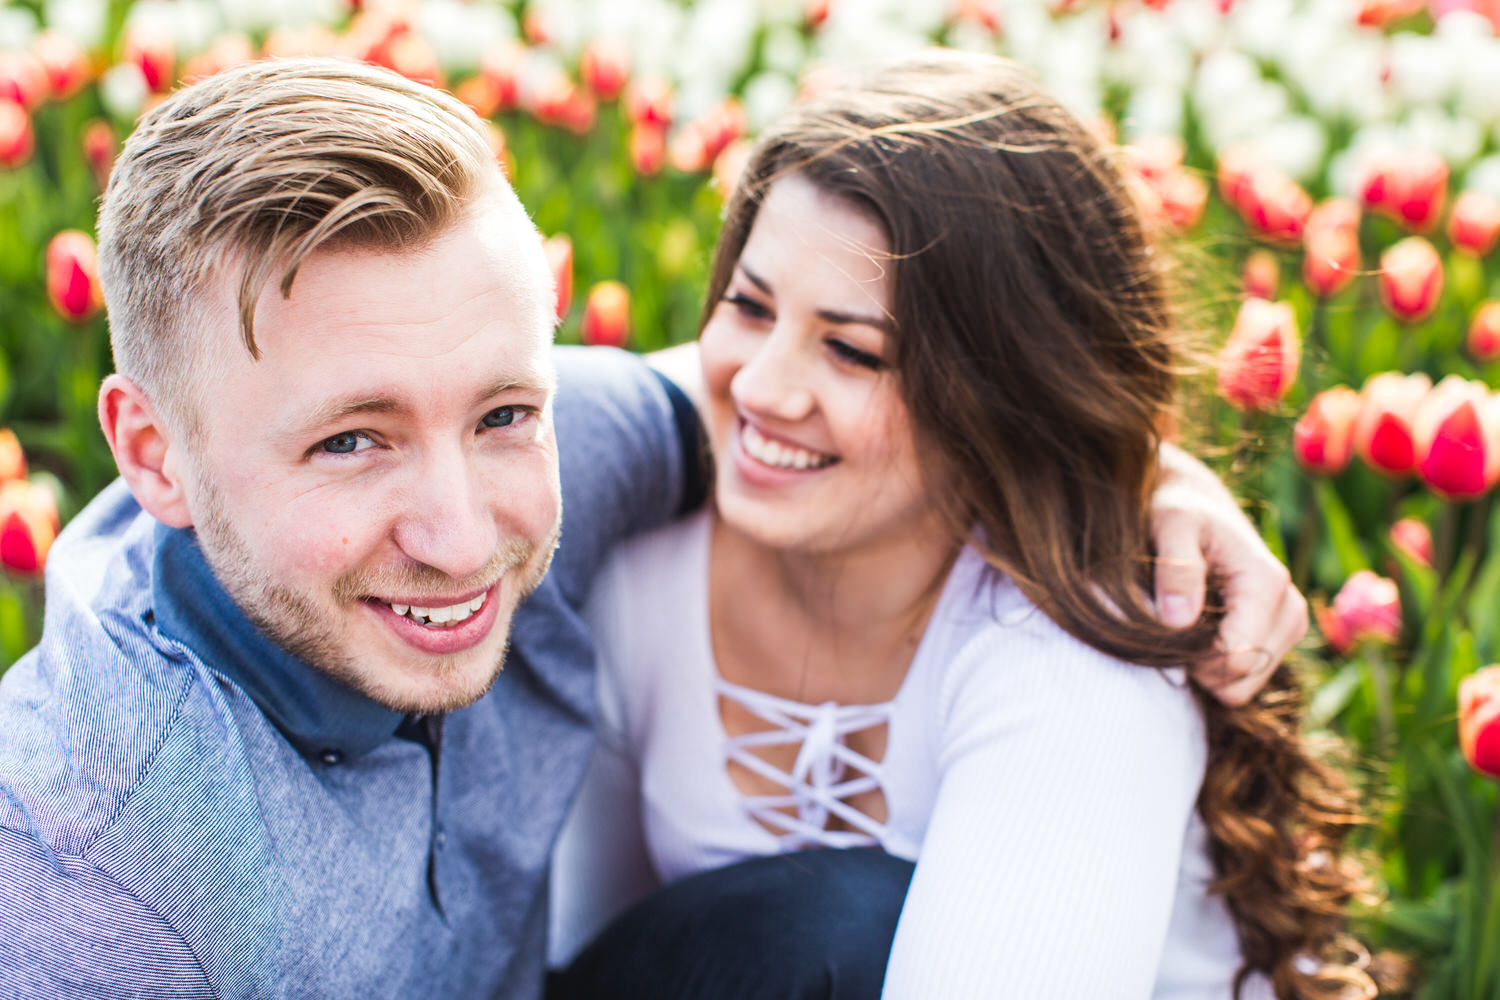 An engagment session shot at the Abbotsford Tulip Festival